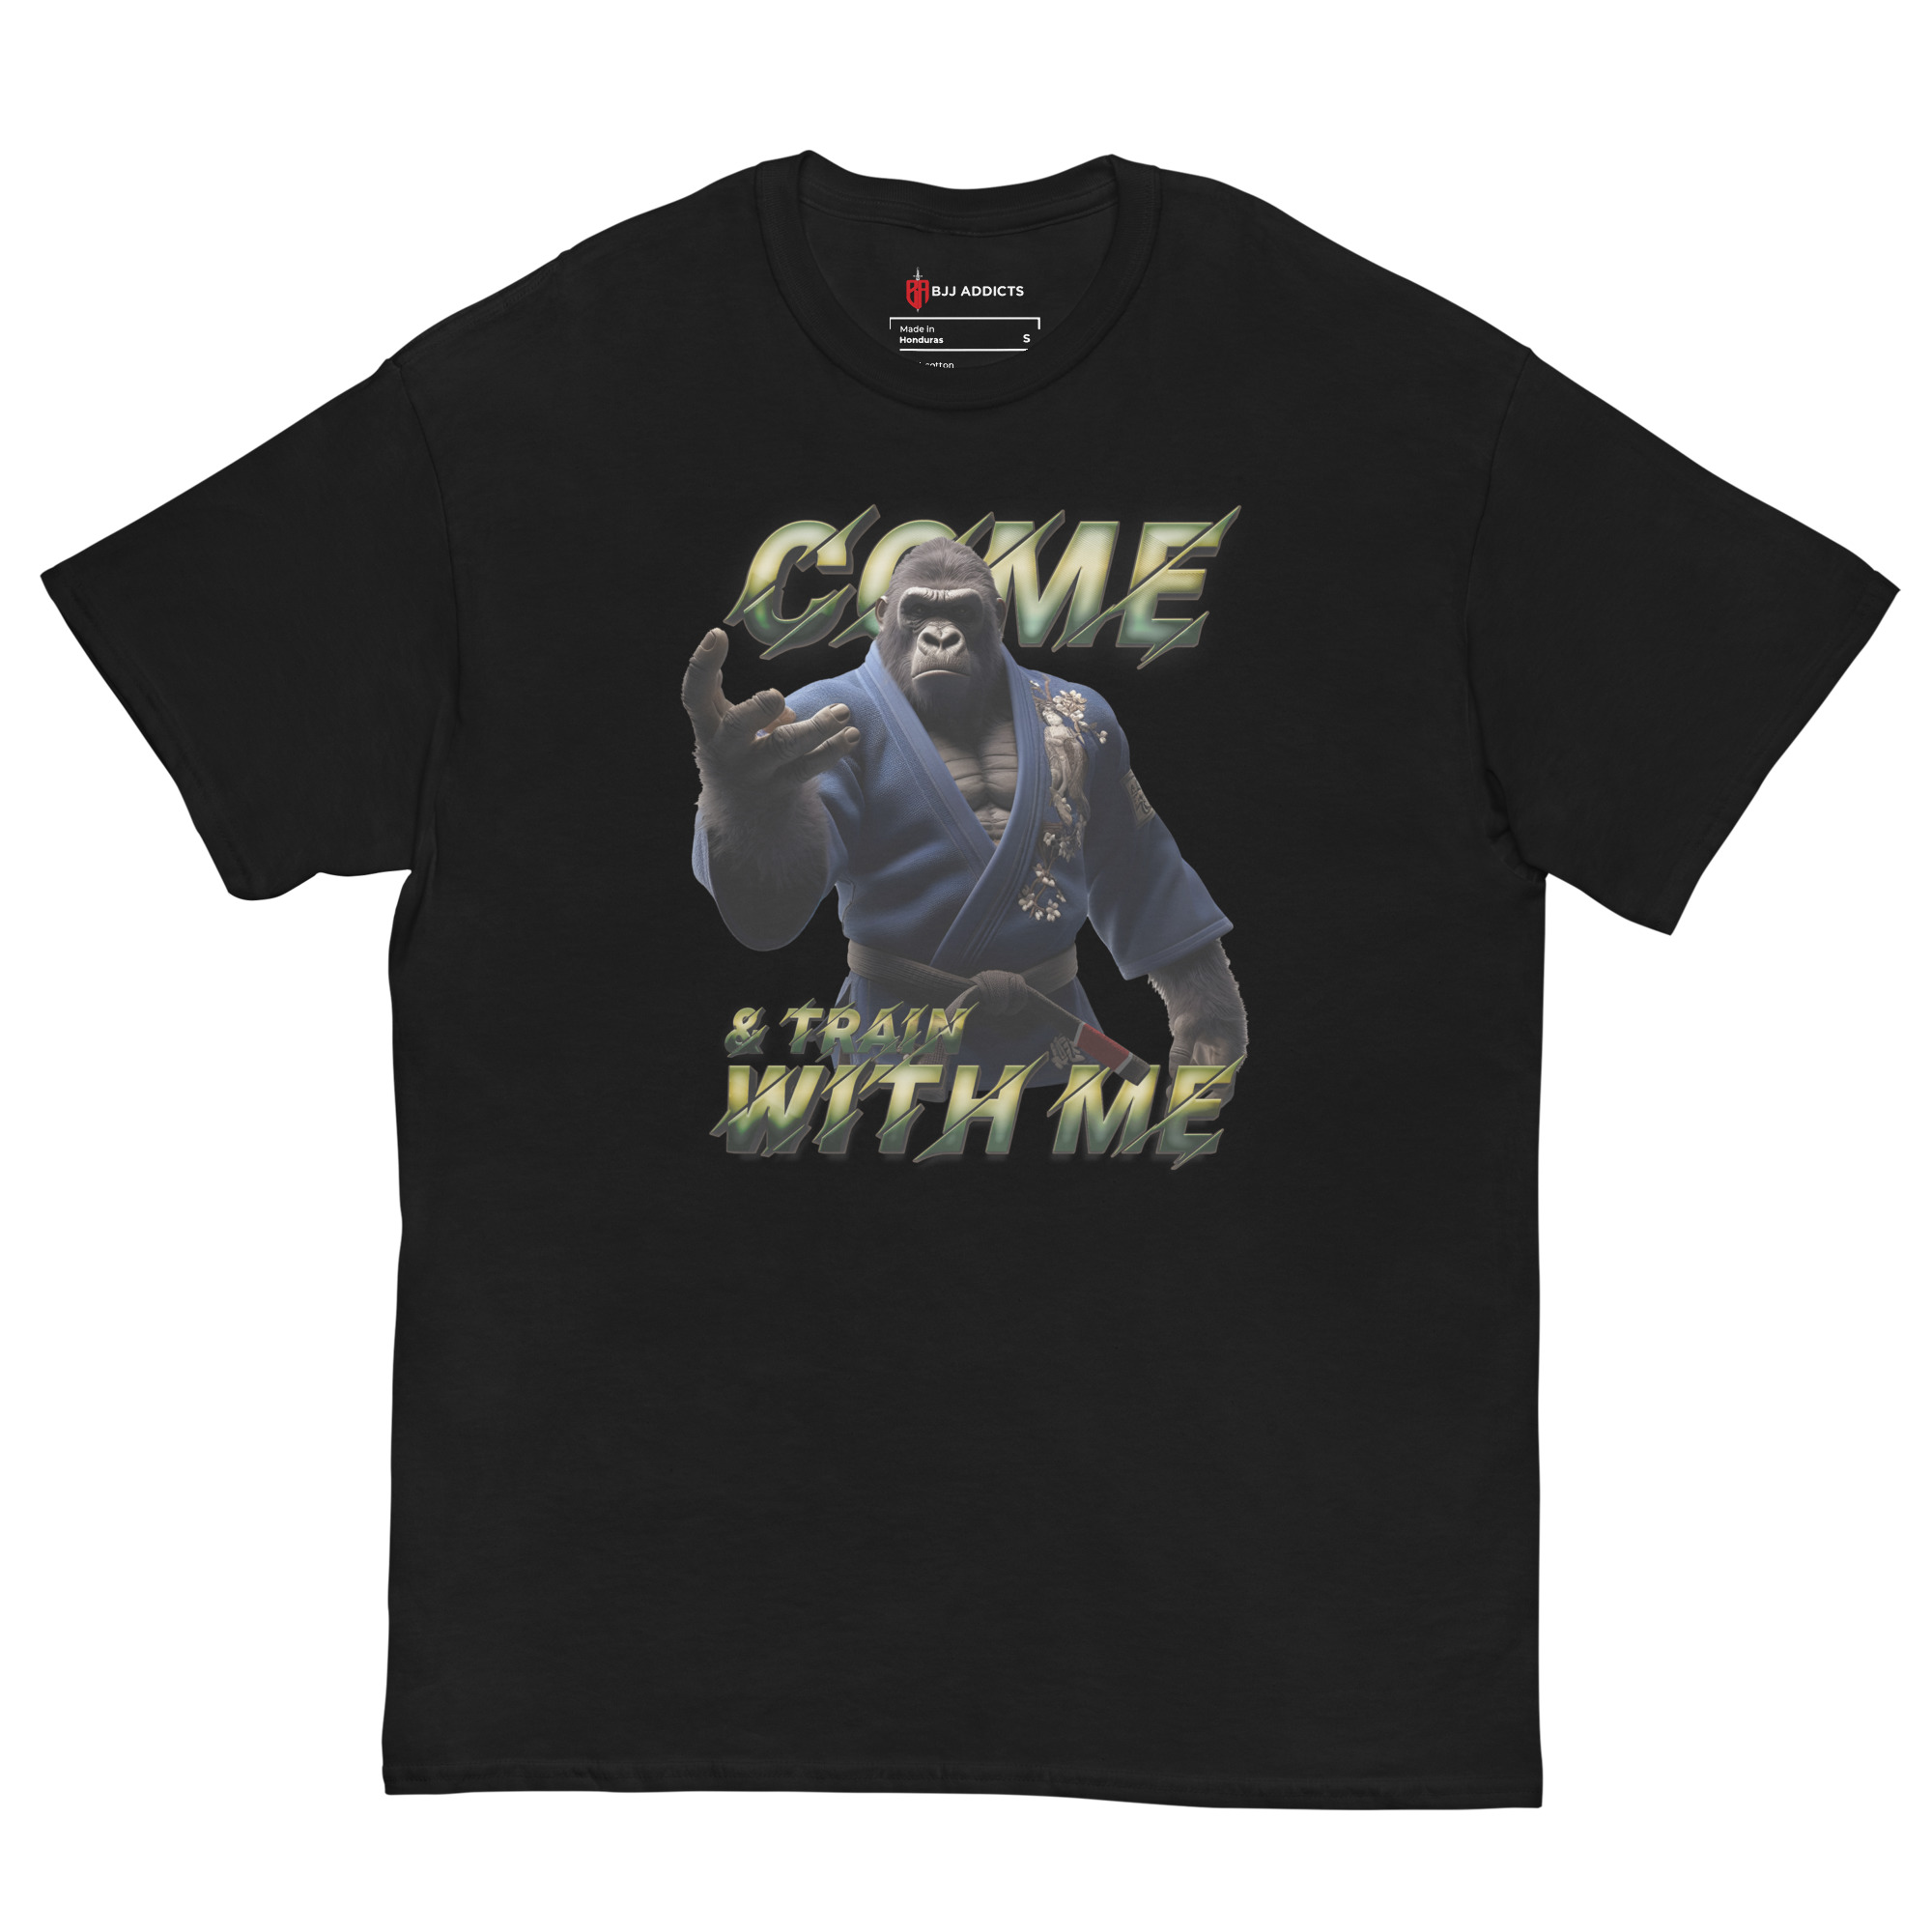 Black Belt Gorilla Challenge Tee: Inviting You to Roll 2